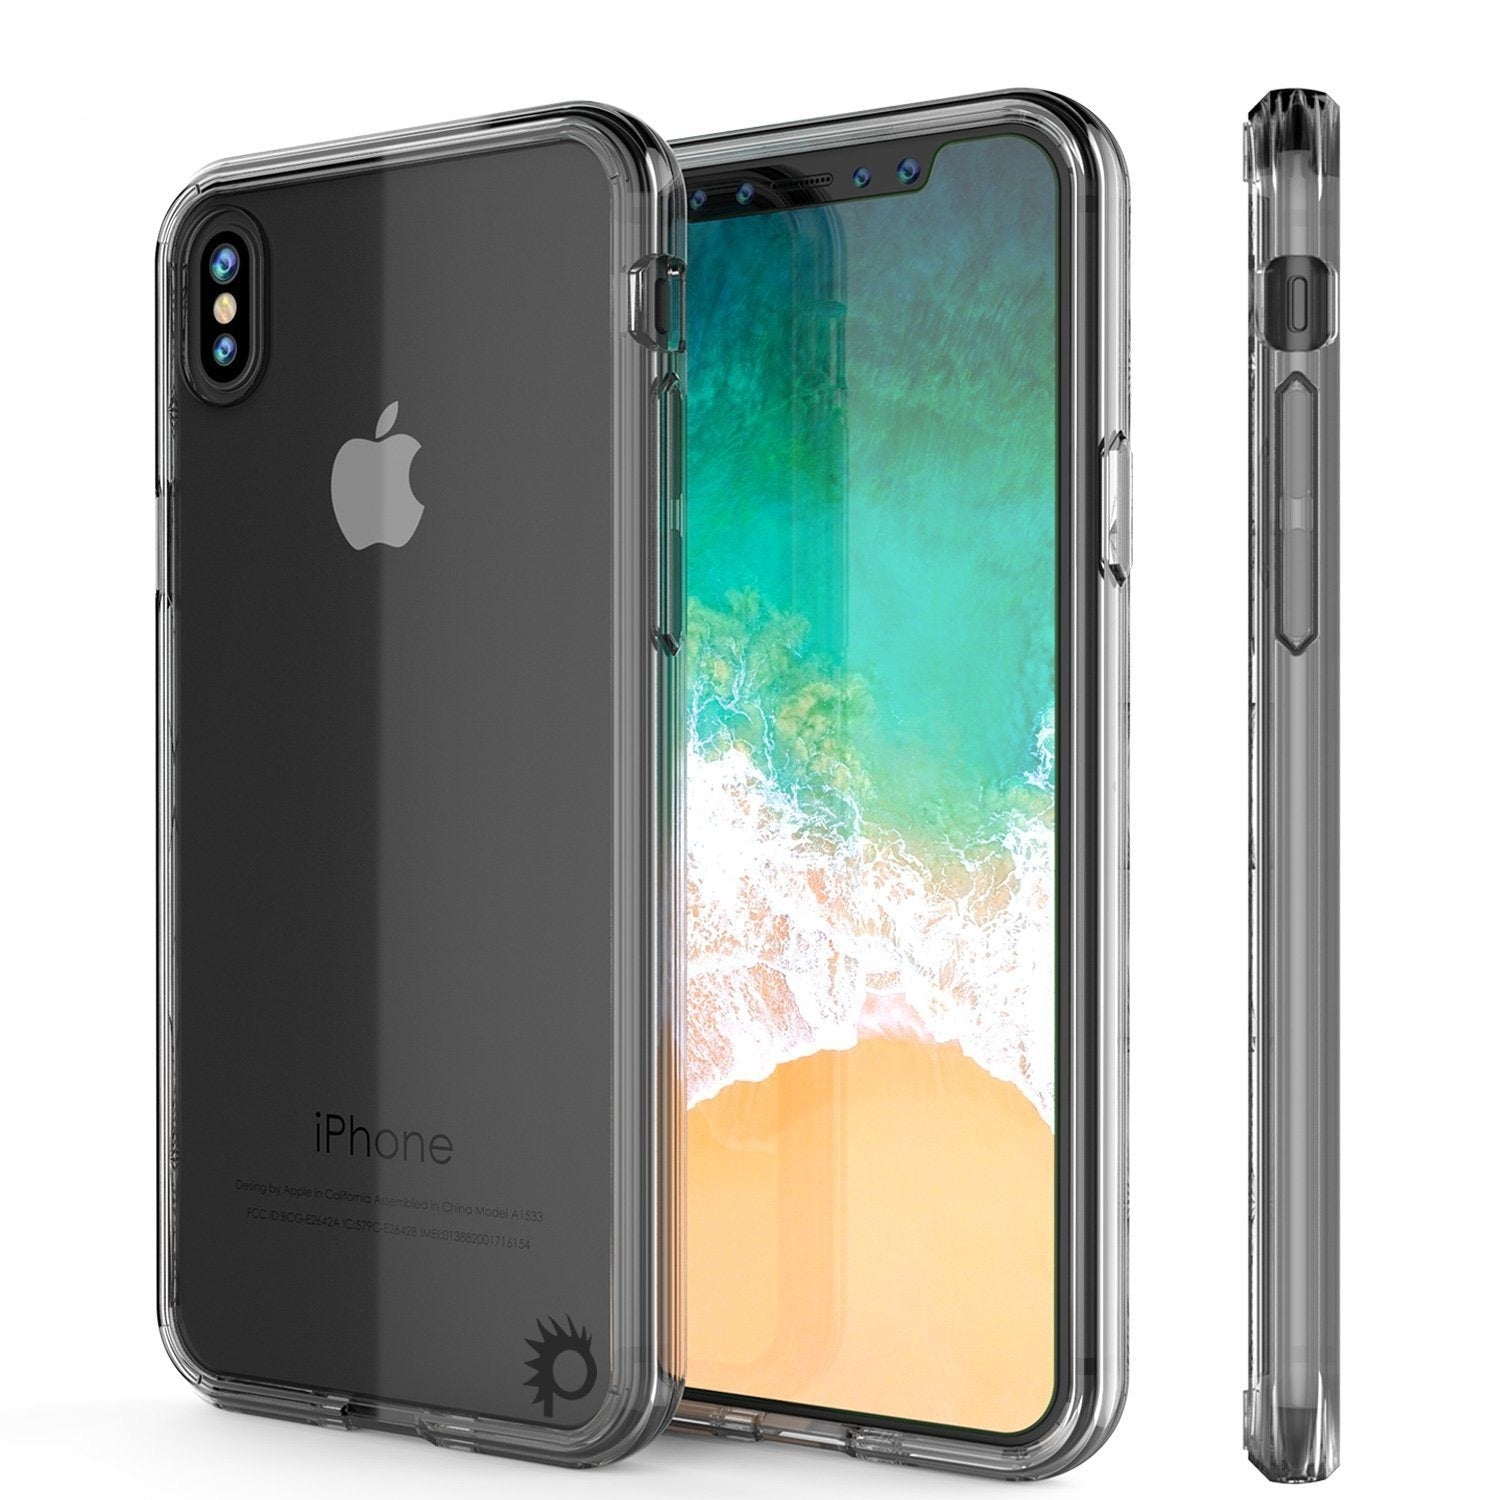 iPhone X Case, PUNKcase [LUCID 2.0 Series] [Slim Fit] Armor Cover W/Integrated Anti-Shock System & Tempered Glass PUNKSHIELD Screen Protector [Clear]